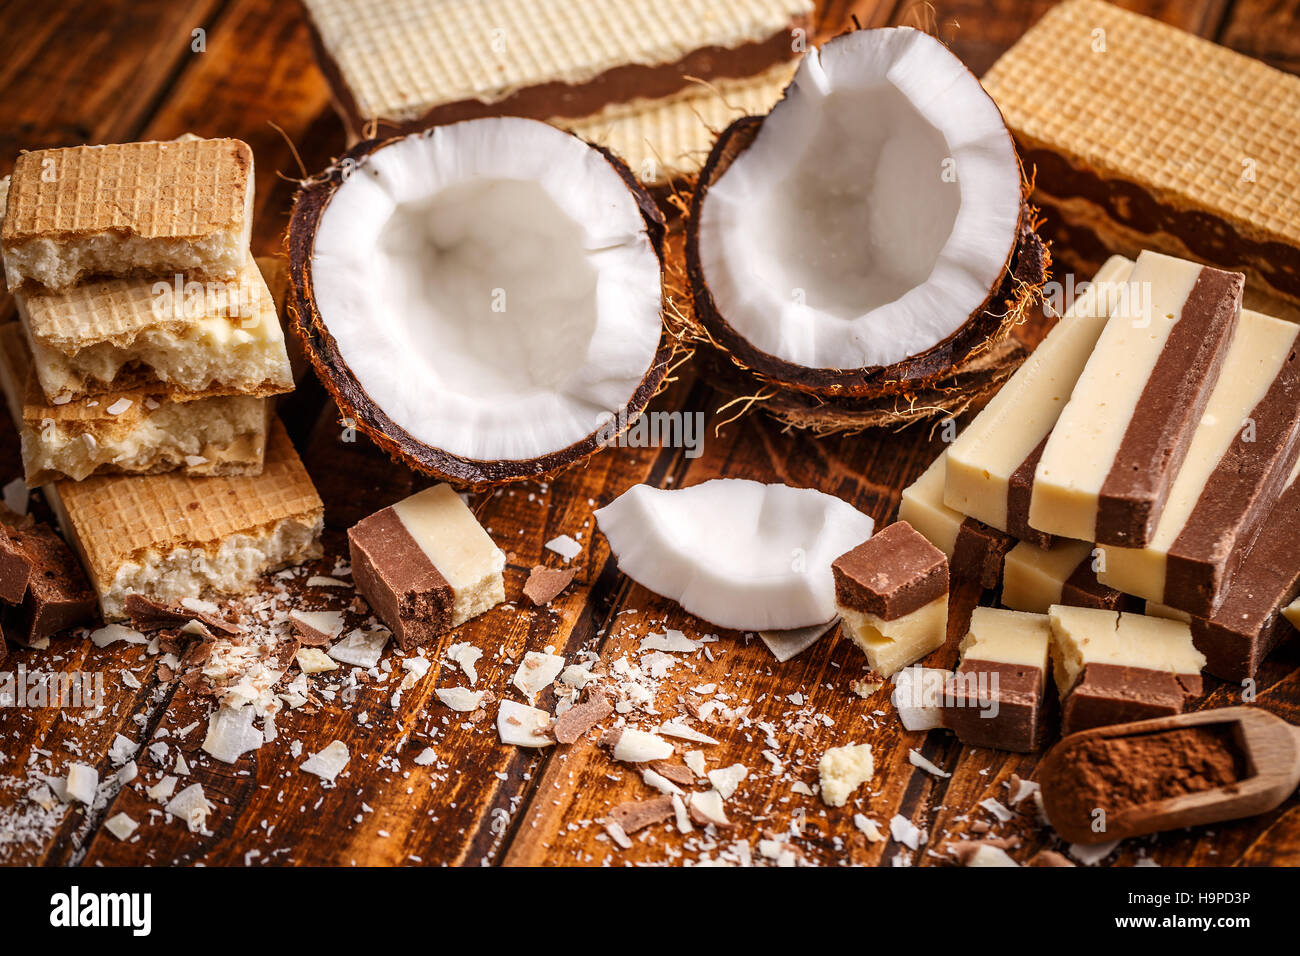 Wafer sandwich biscuits Stock Photo